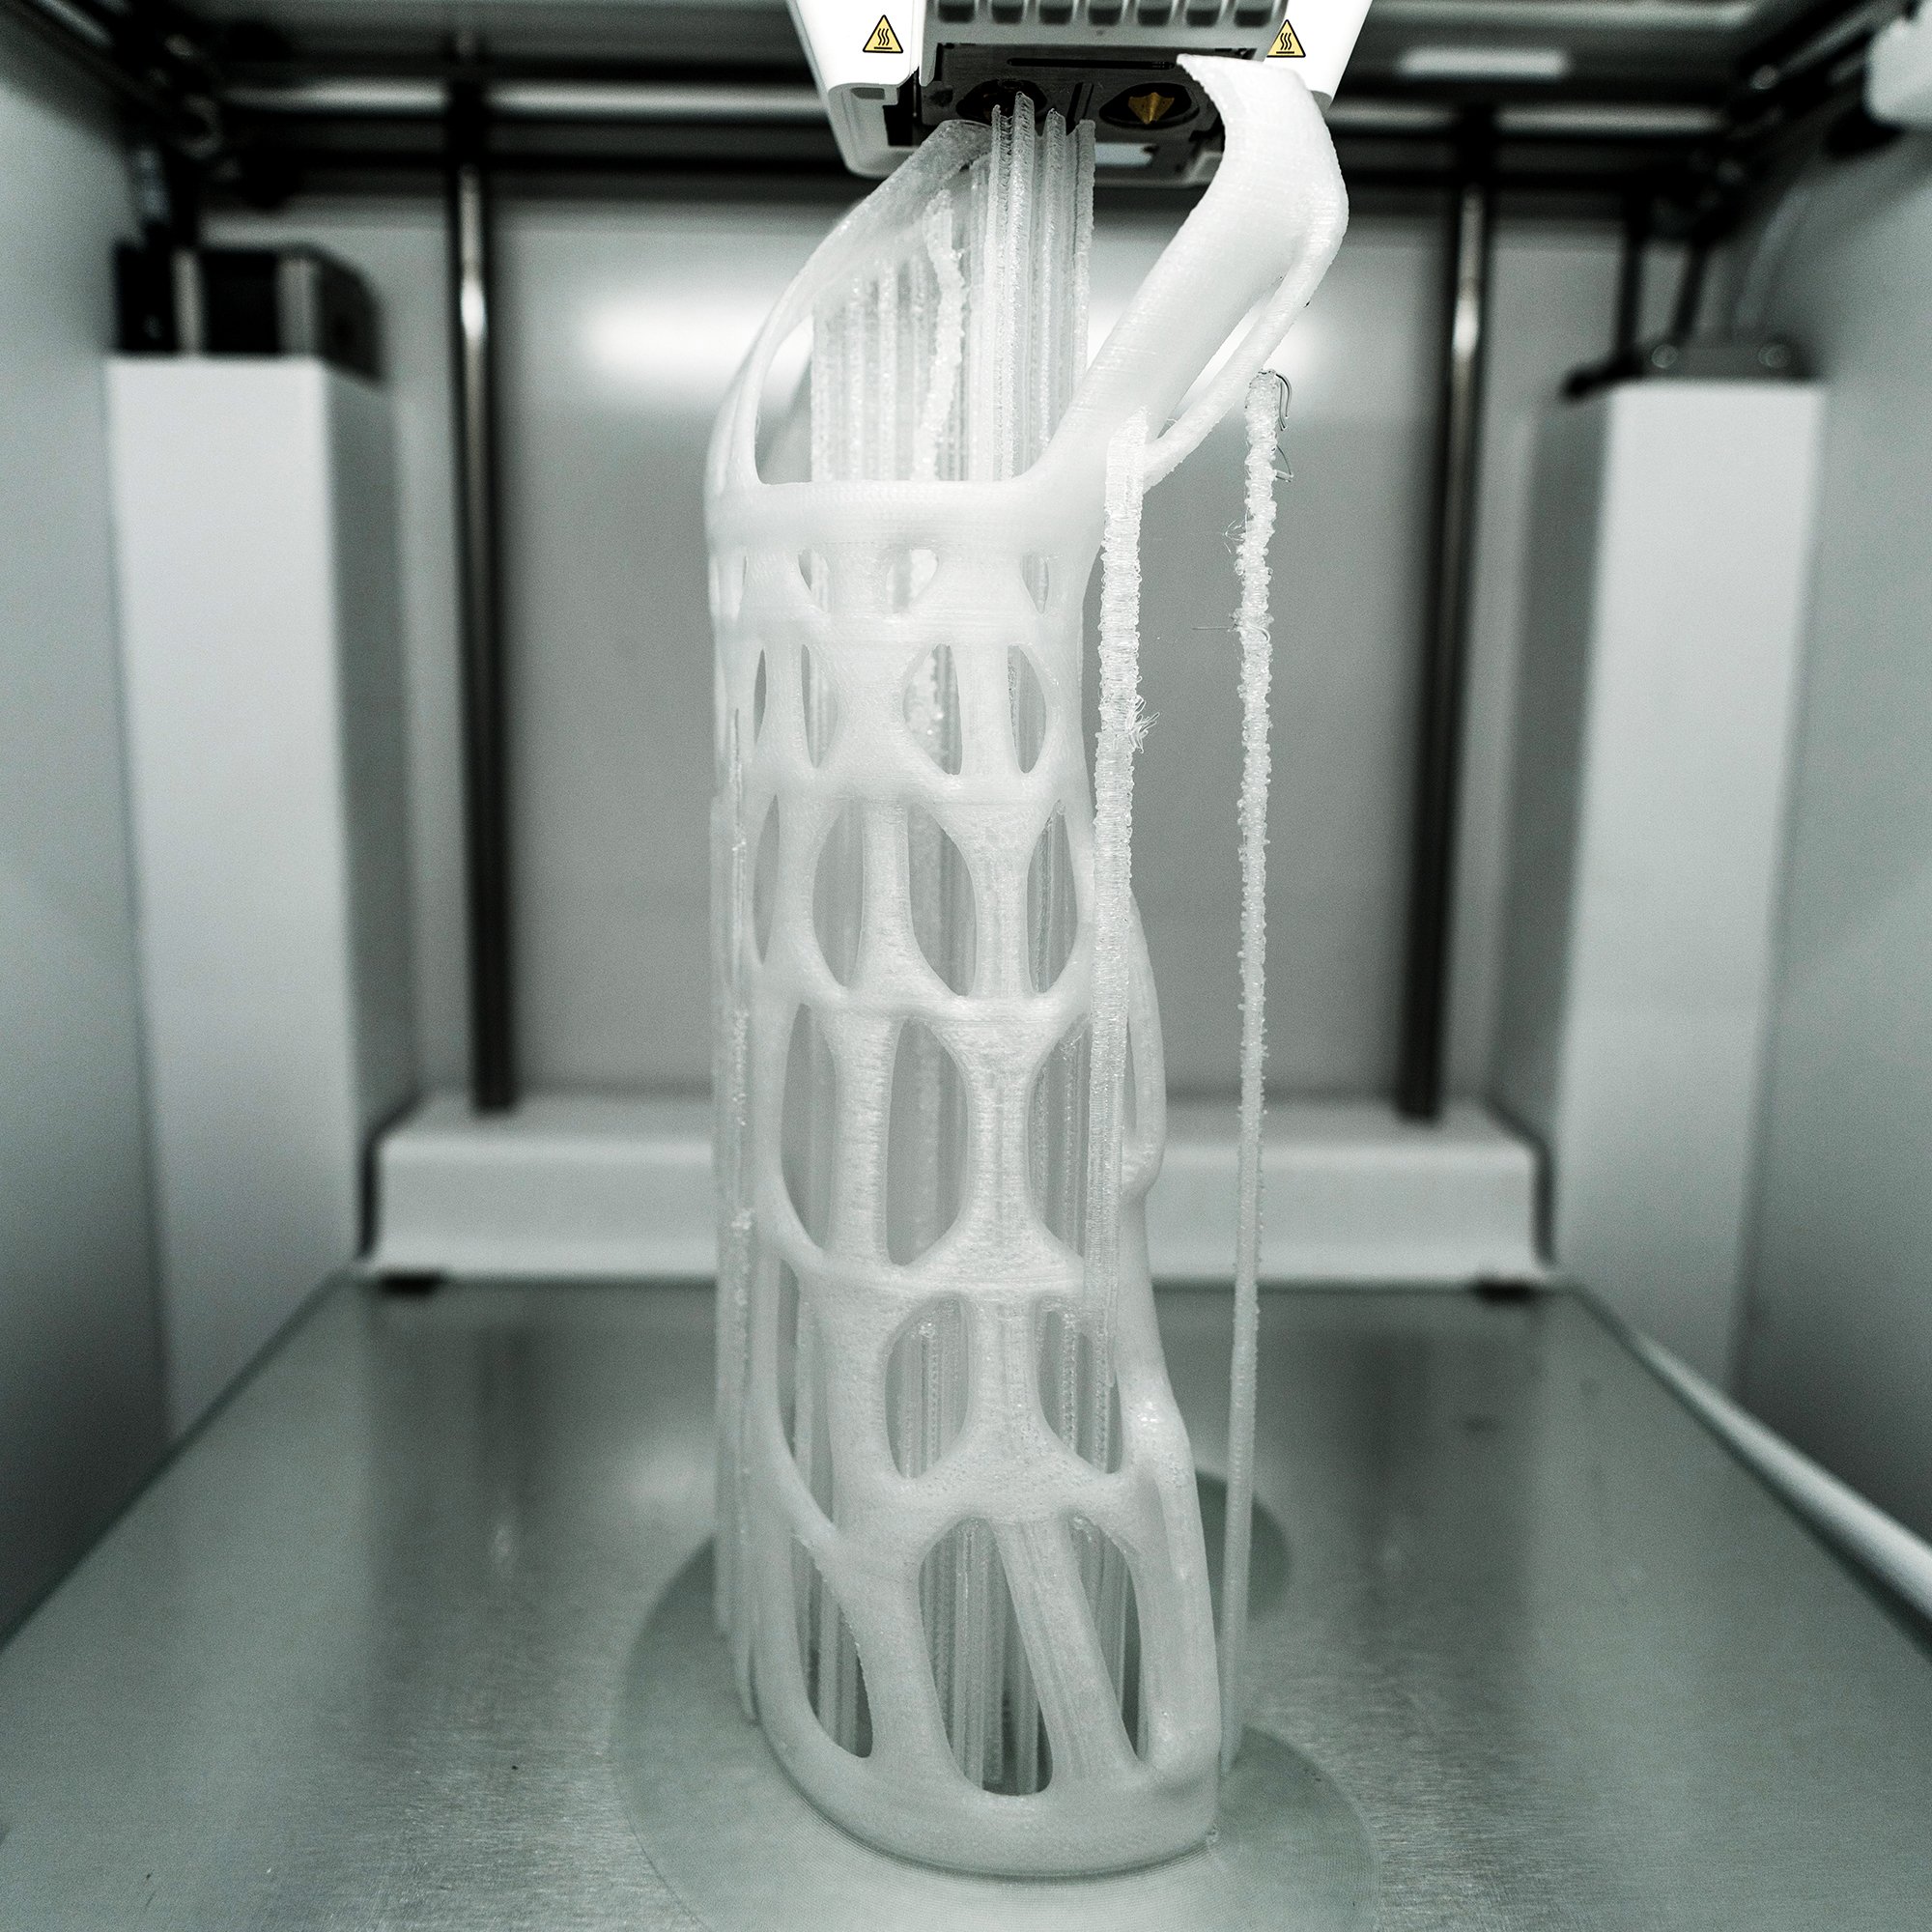 3D Printing service in the Netherlands for business and individuals